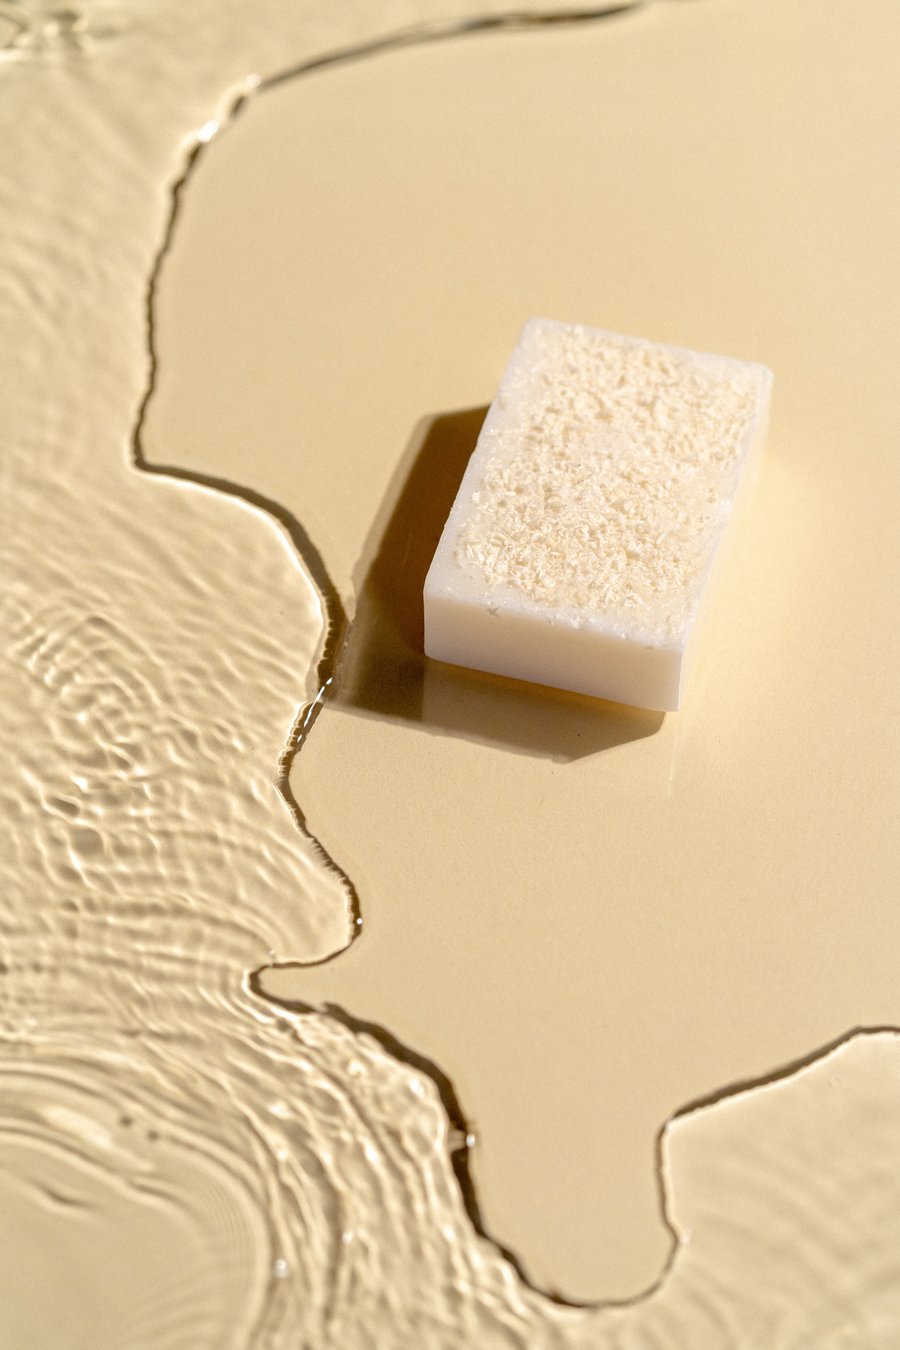 Coconut and Shea Butter Soap Bar - Two Bars